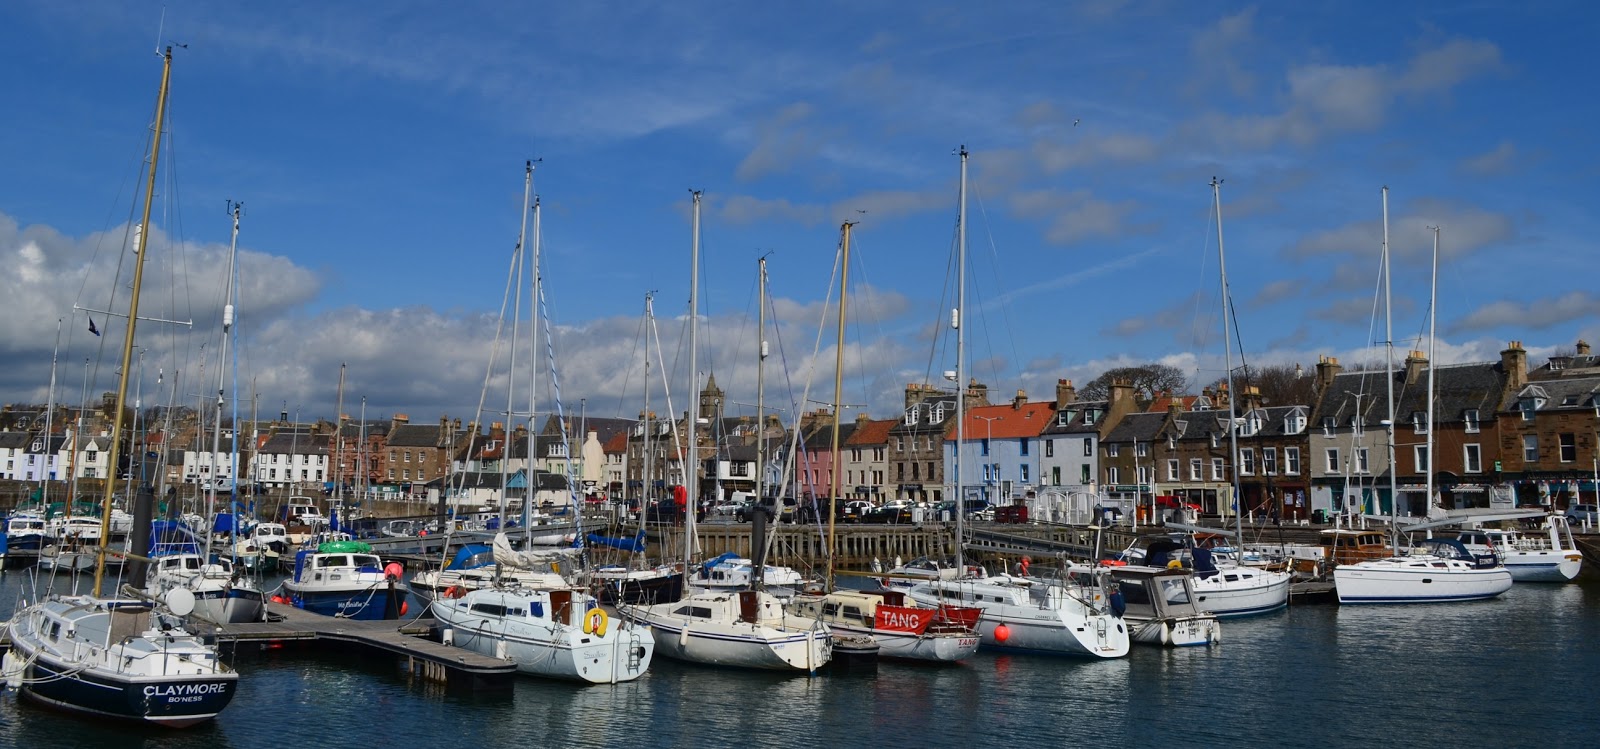 Anstruther Private Hire Taxis